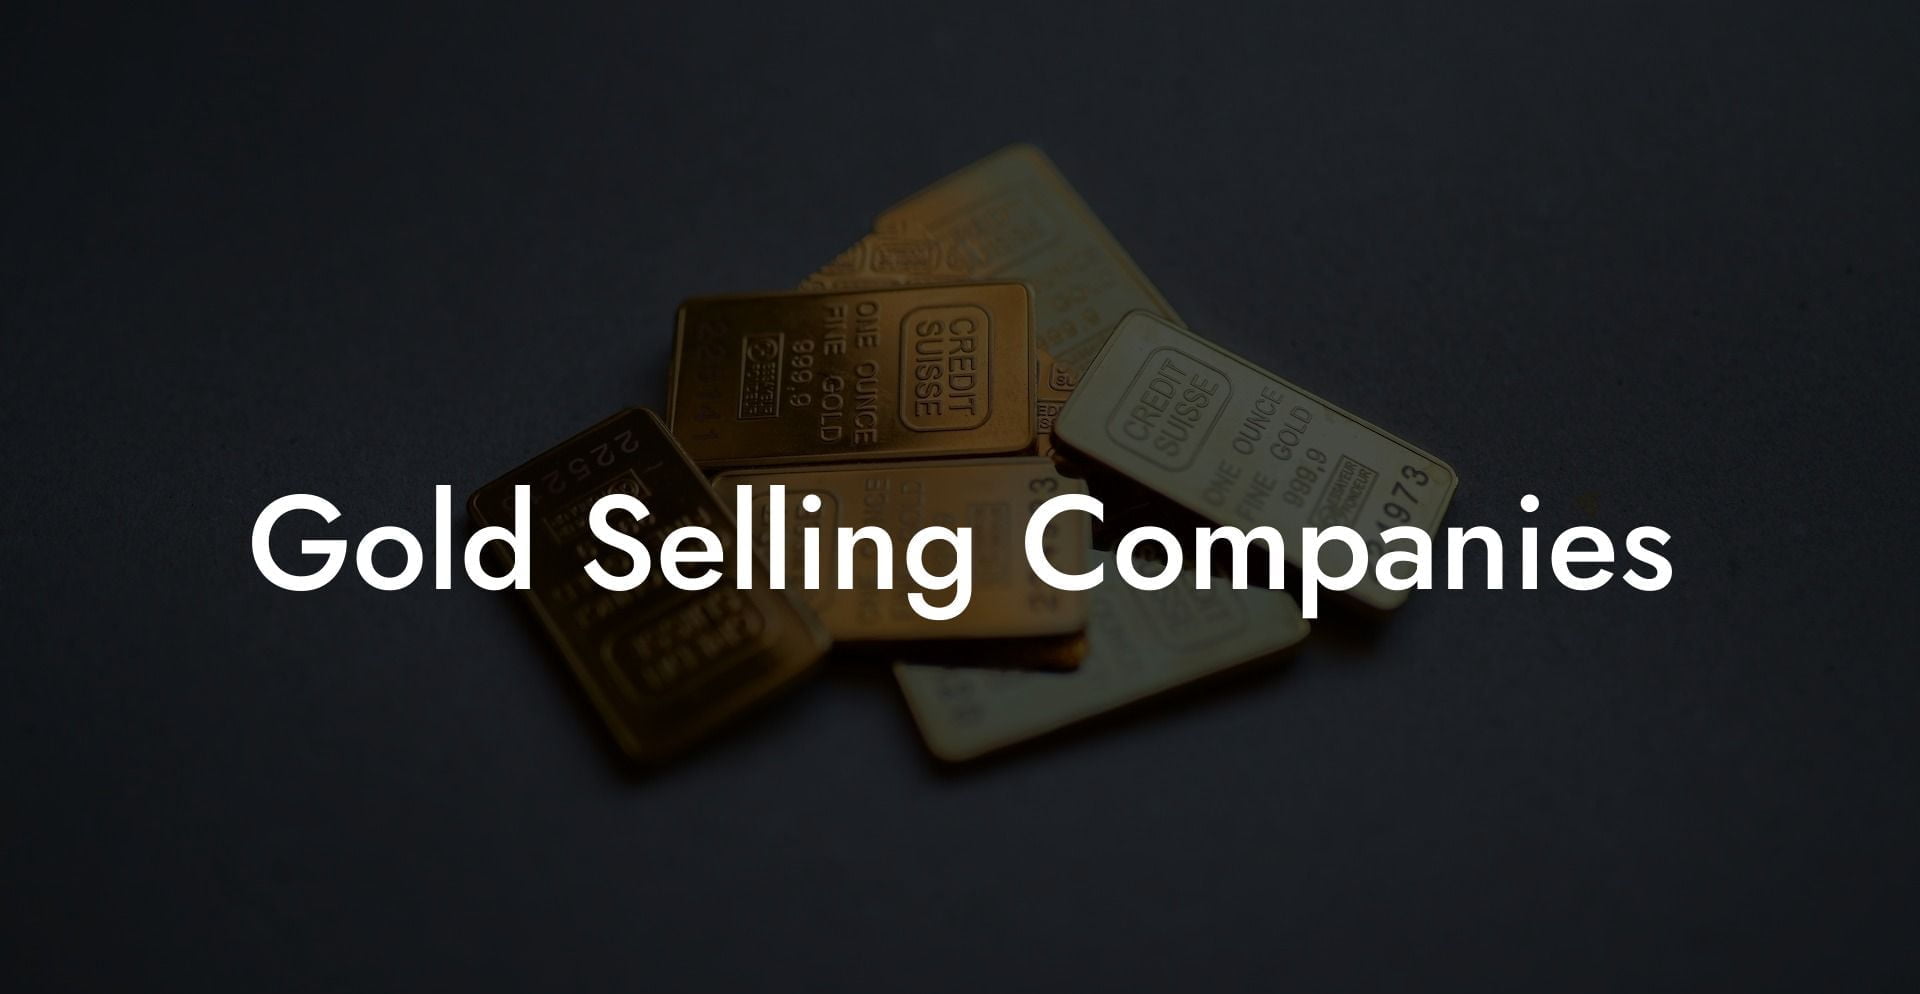 Gold Selling Companies